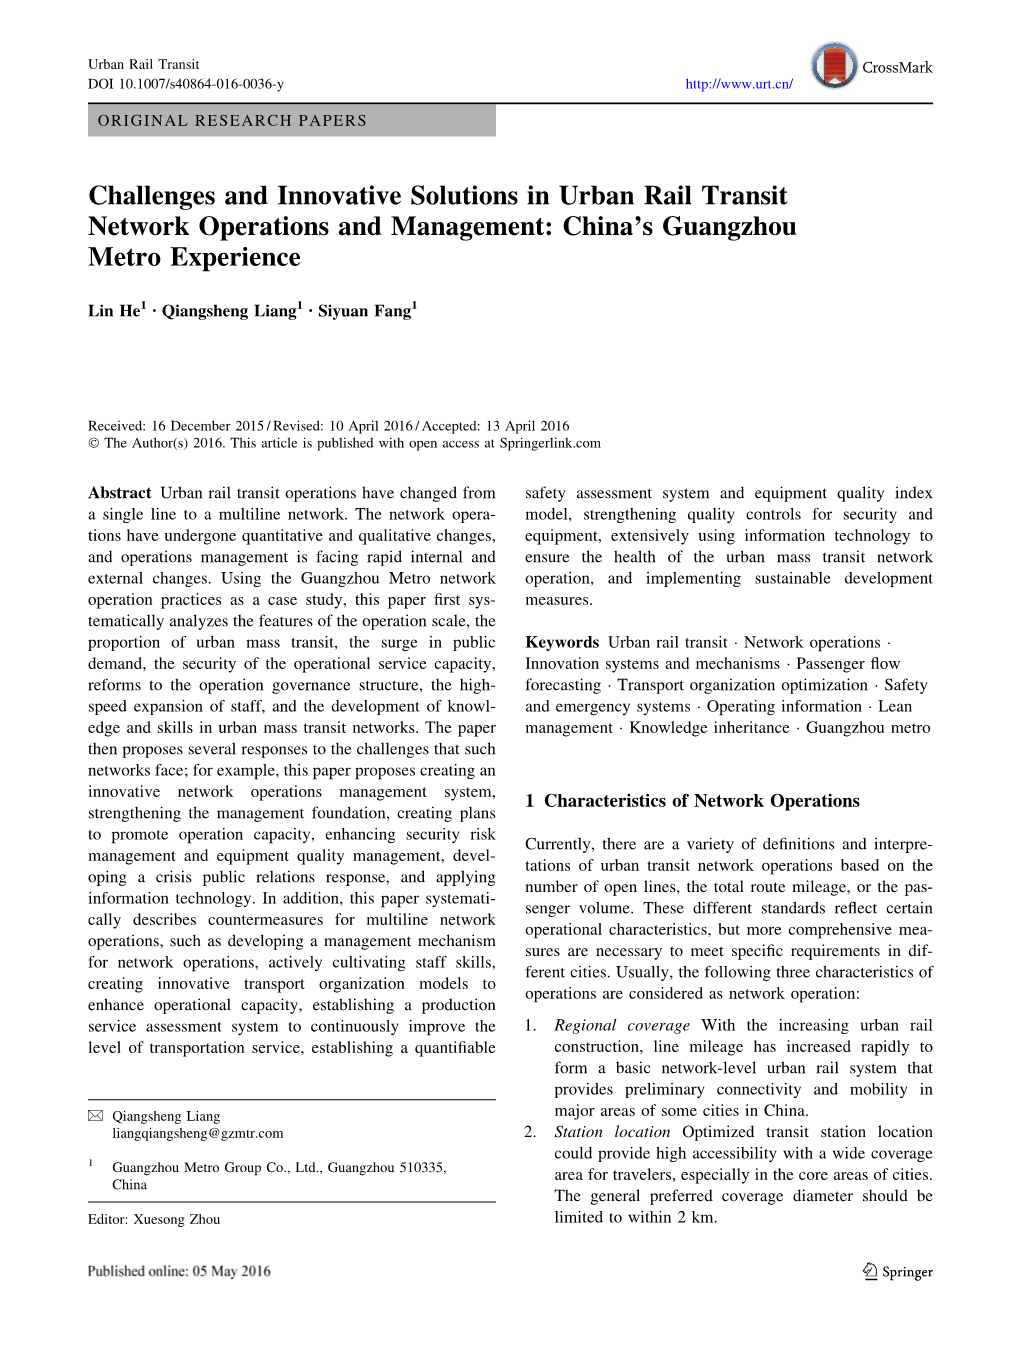 Challenges and Innovative Solutions in Urban Rail Transit Network Operations and Management: China’S Guangzhou Metro Experience